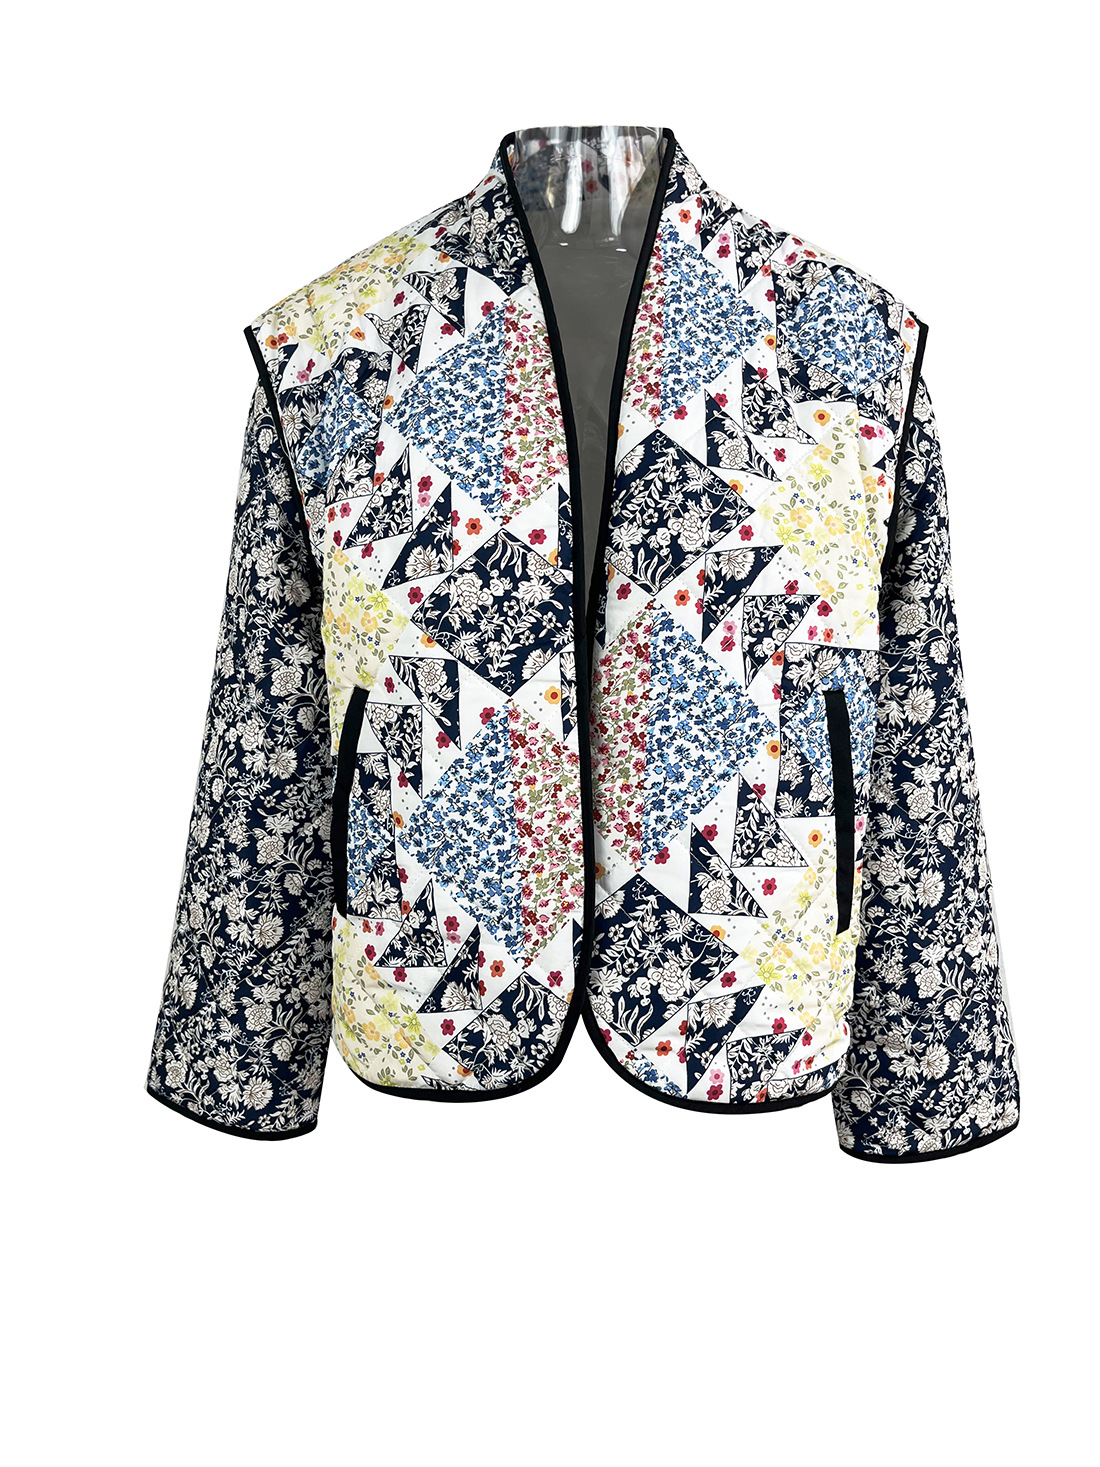 Chic Double-sided Wearing CottonDual-purpose Sleeve Removable Jacket